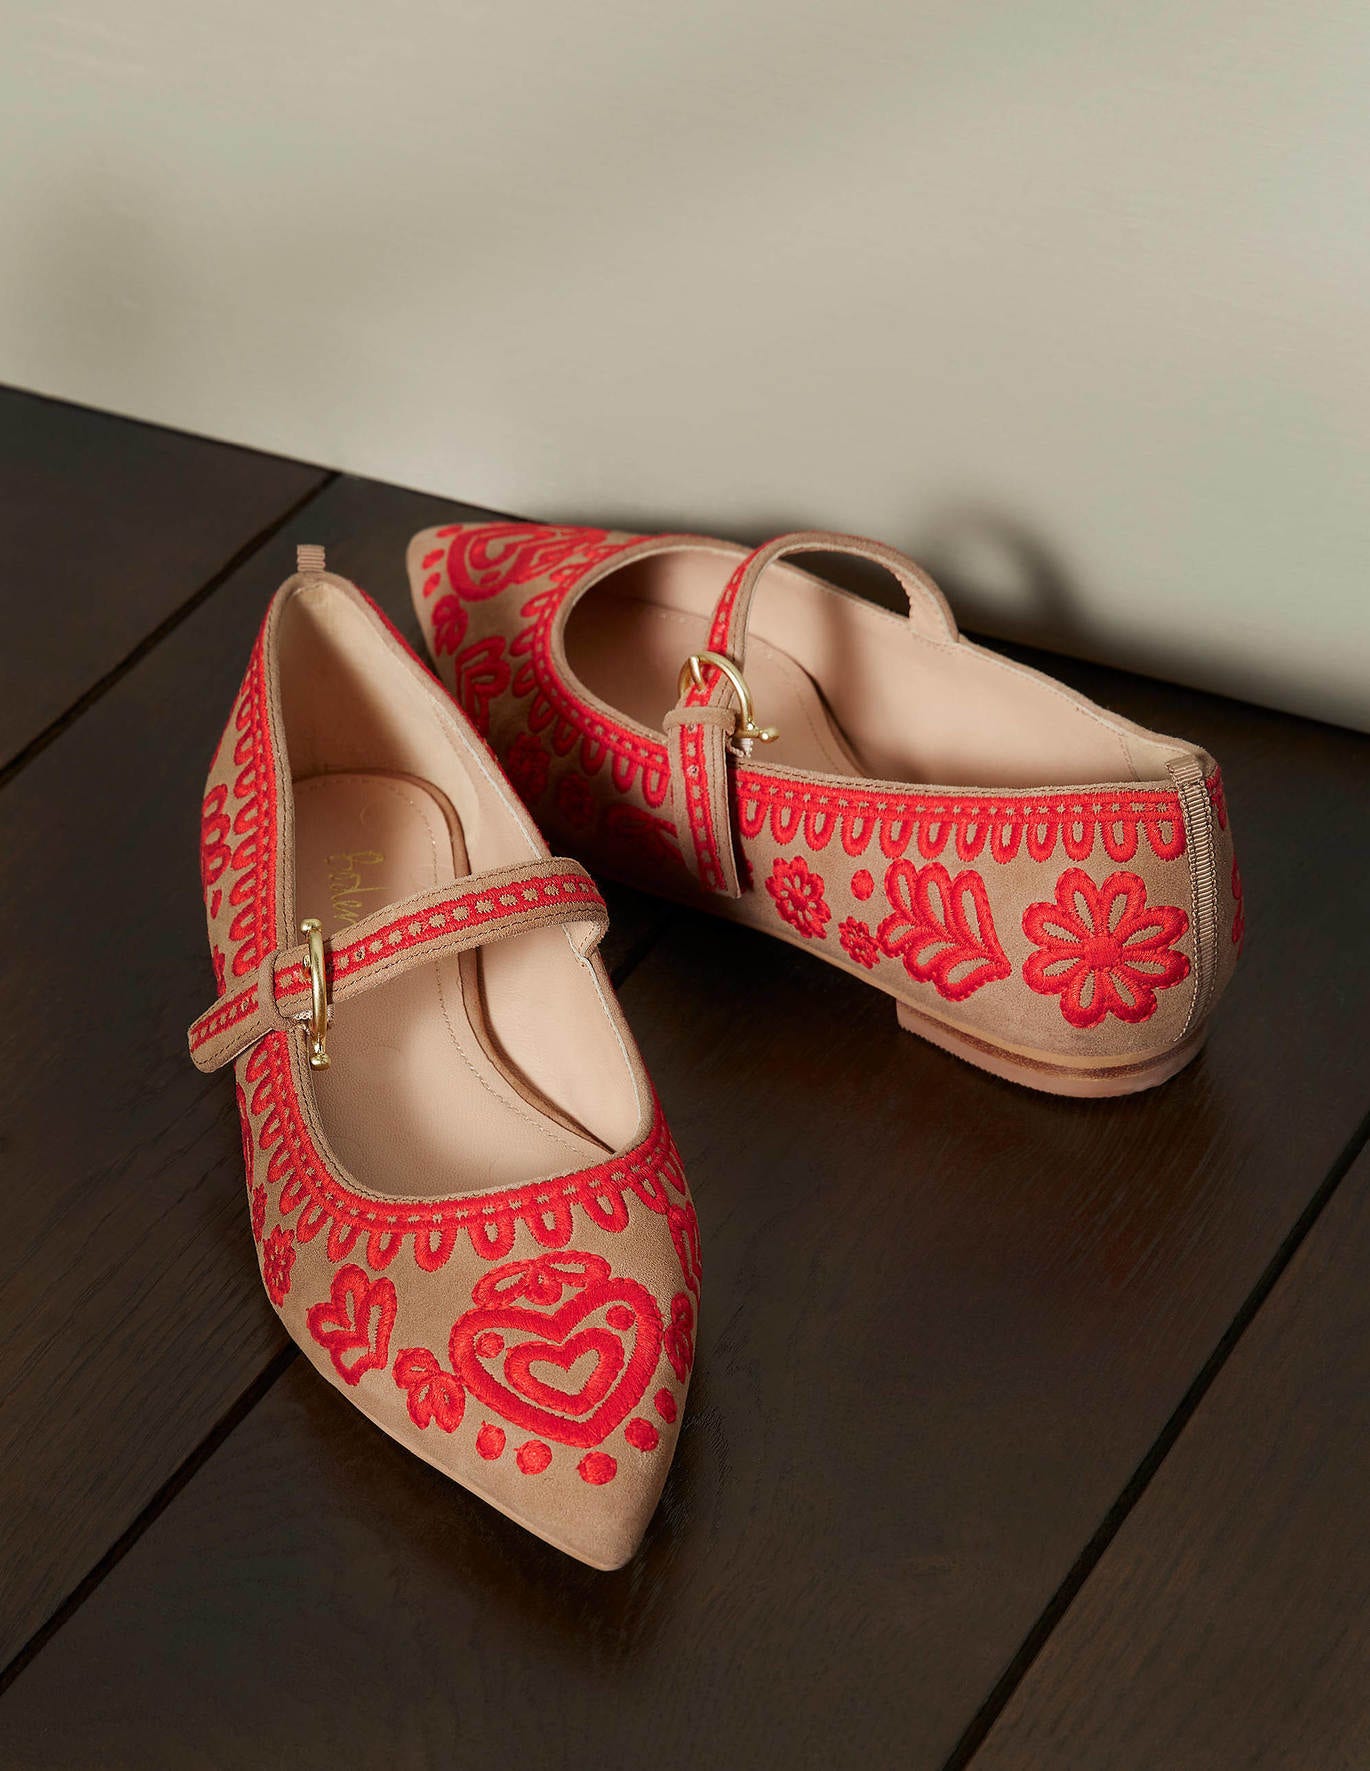 Boden Pointed Toe Mary Jane Shoes - Acorn/Embroidery